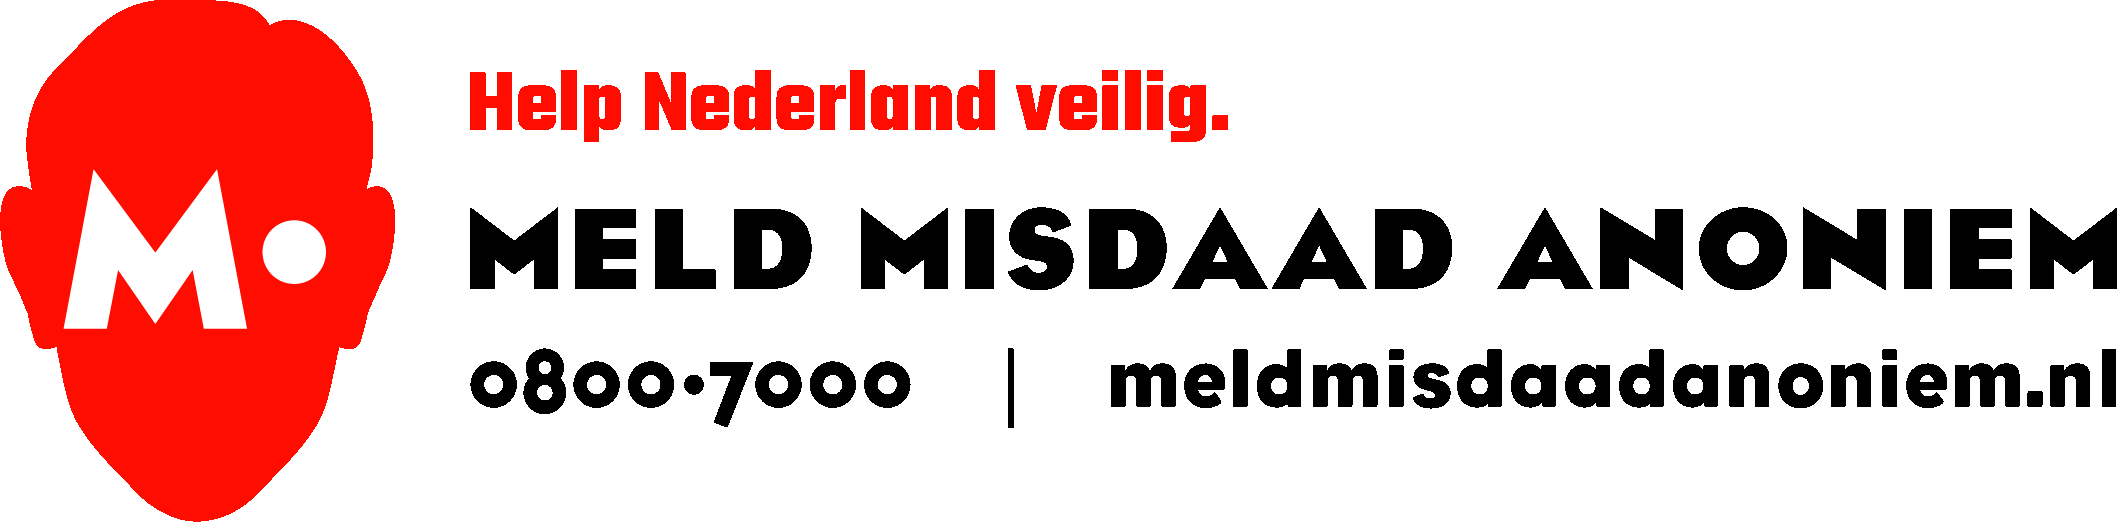 logo-misdaad-anoniem.png title = 